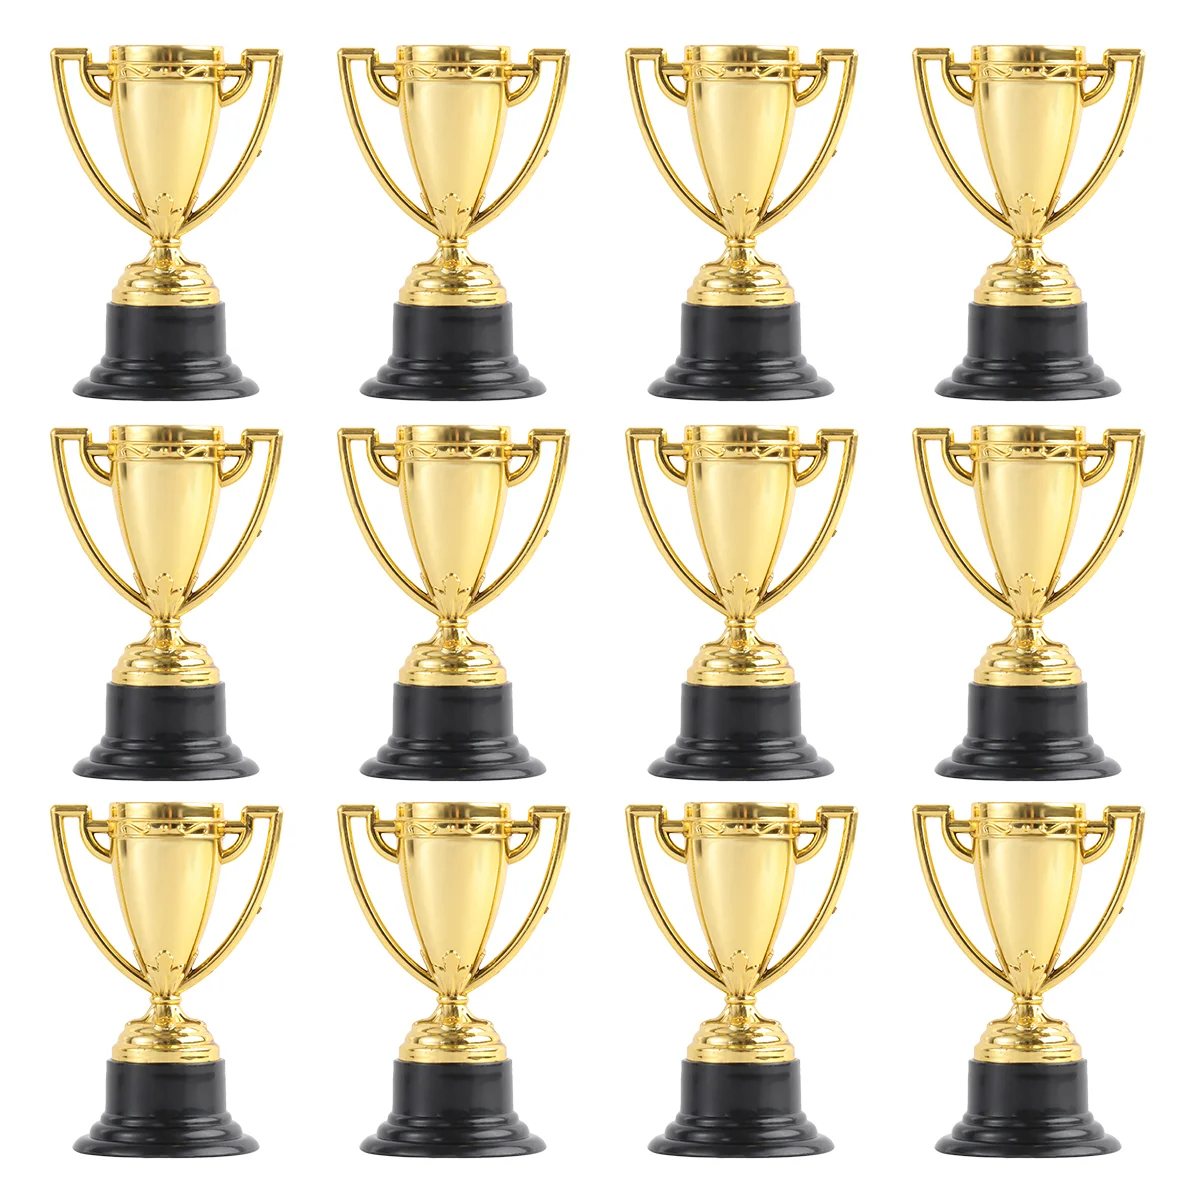 

Trophy Trophies Award Mini Kids Golden Party Cups Plastic Awards Gold Cup Sports Ceremony Favors Winner Basketball Bulk Baseball